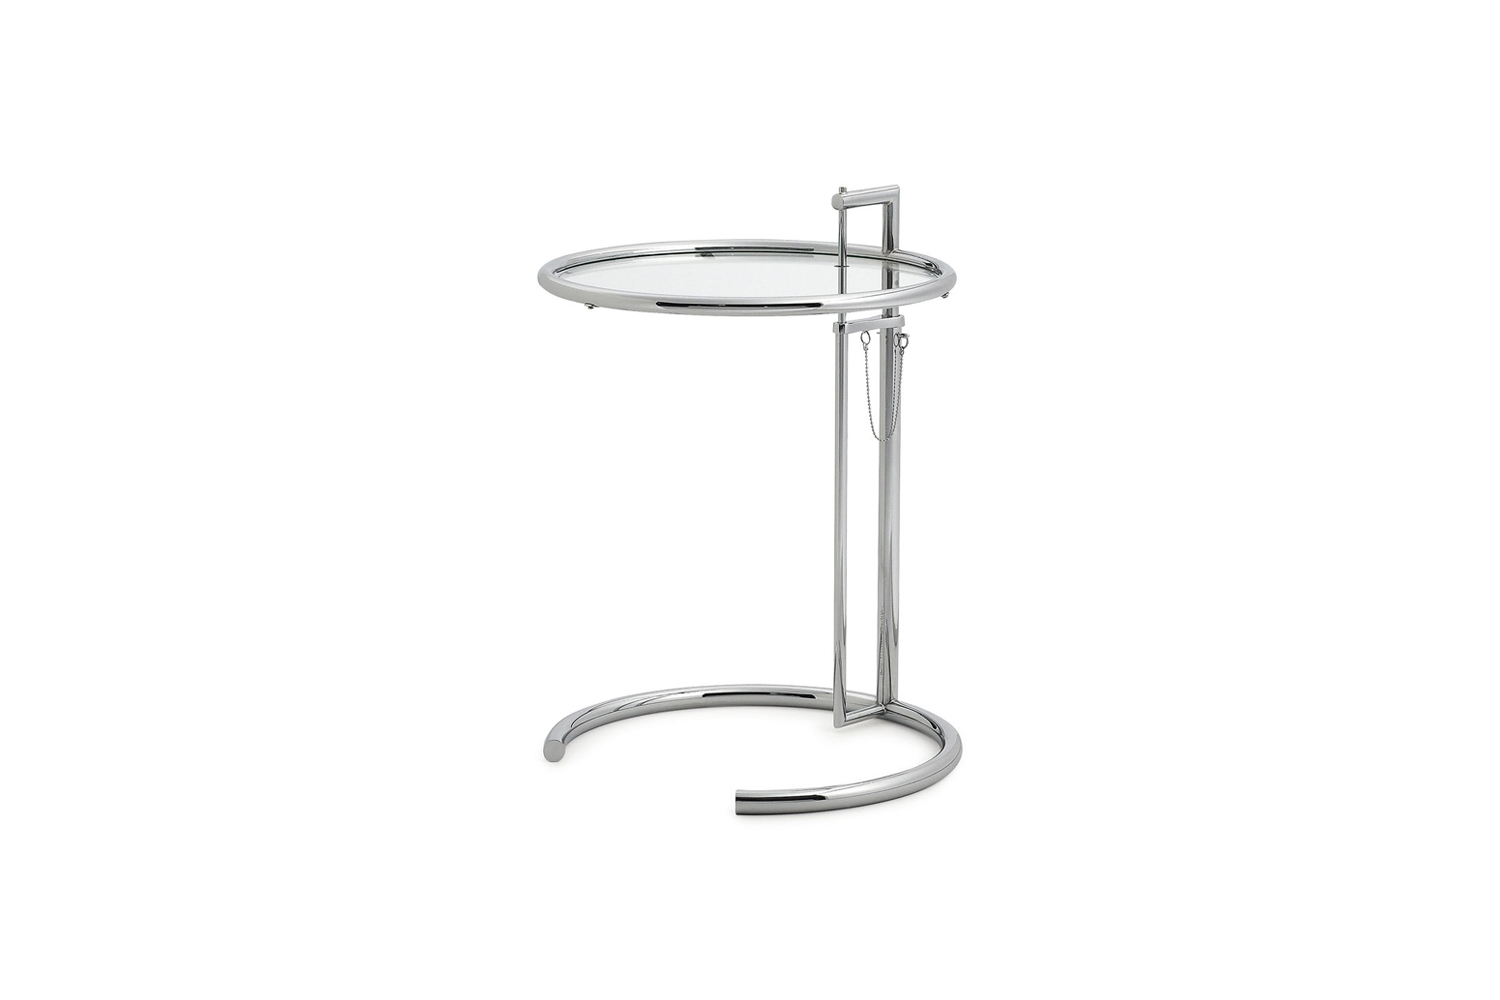 the classic eileen grey design, the e\10\27 adjustable side table is made of tu 21